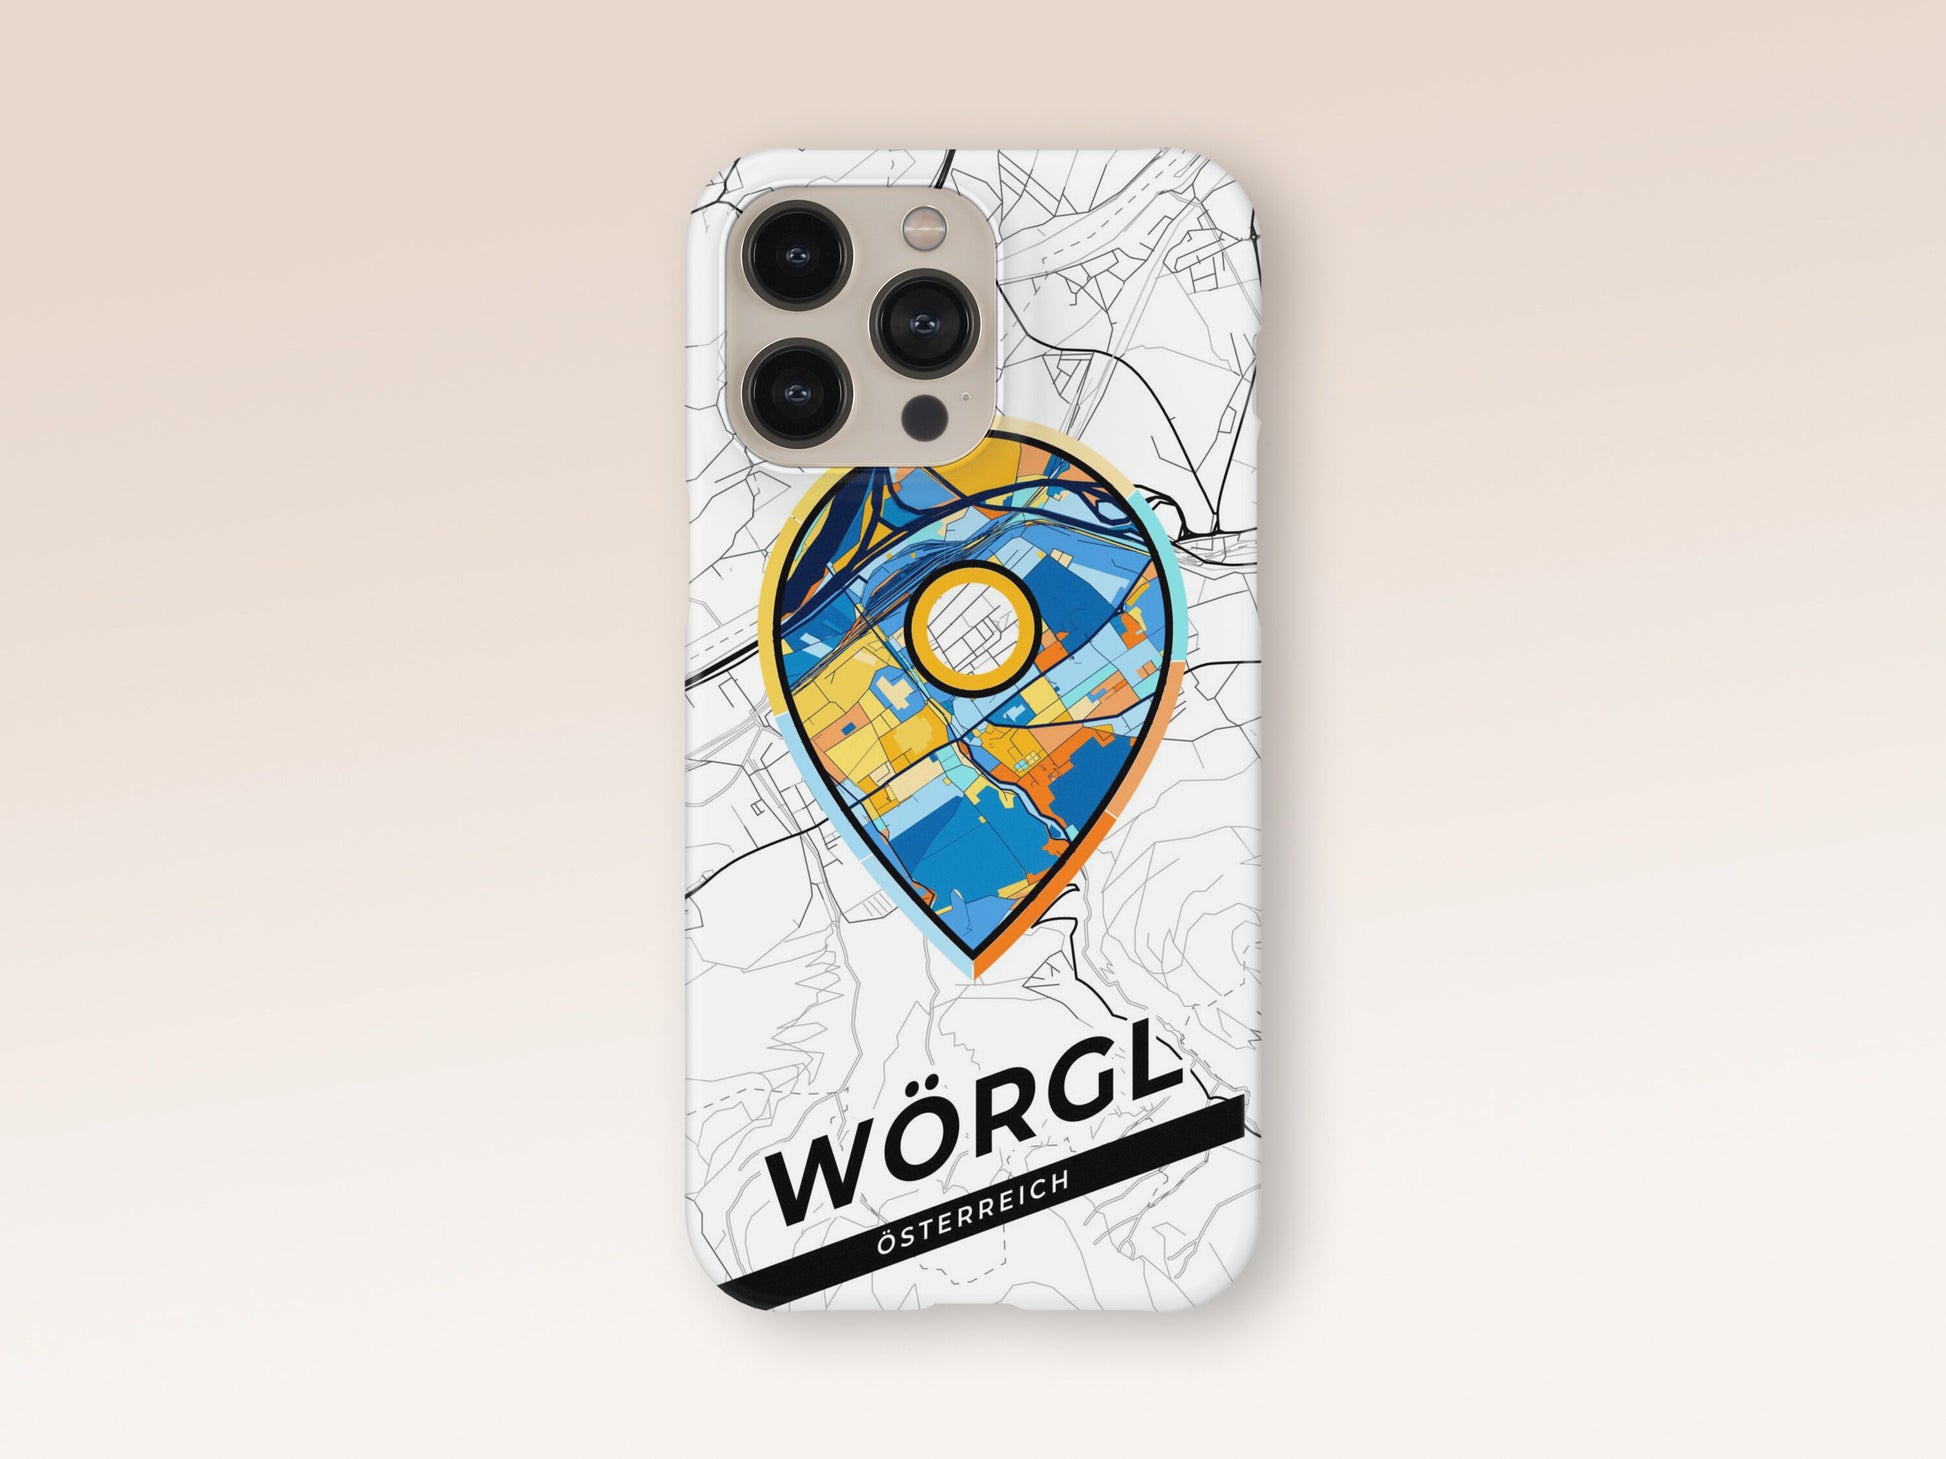 Wörgl Österreich slim phone case with colorful icon 1